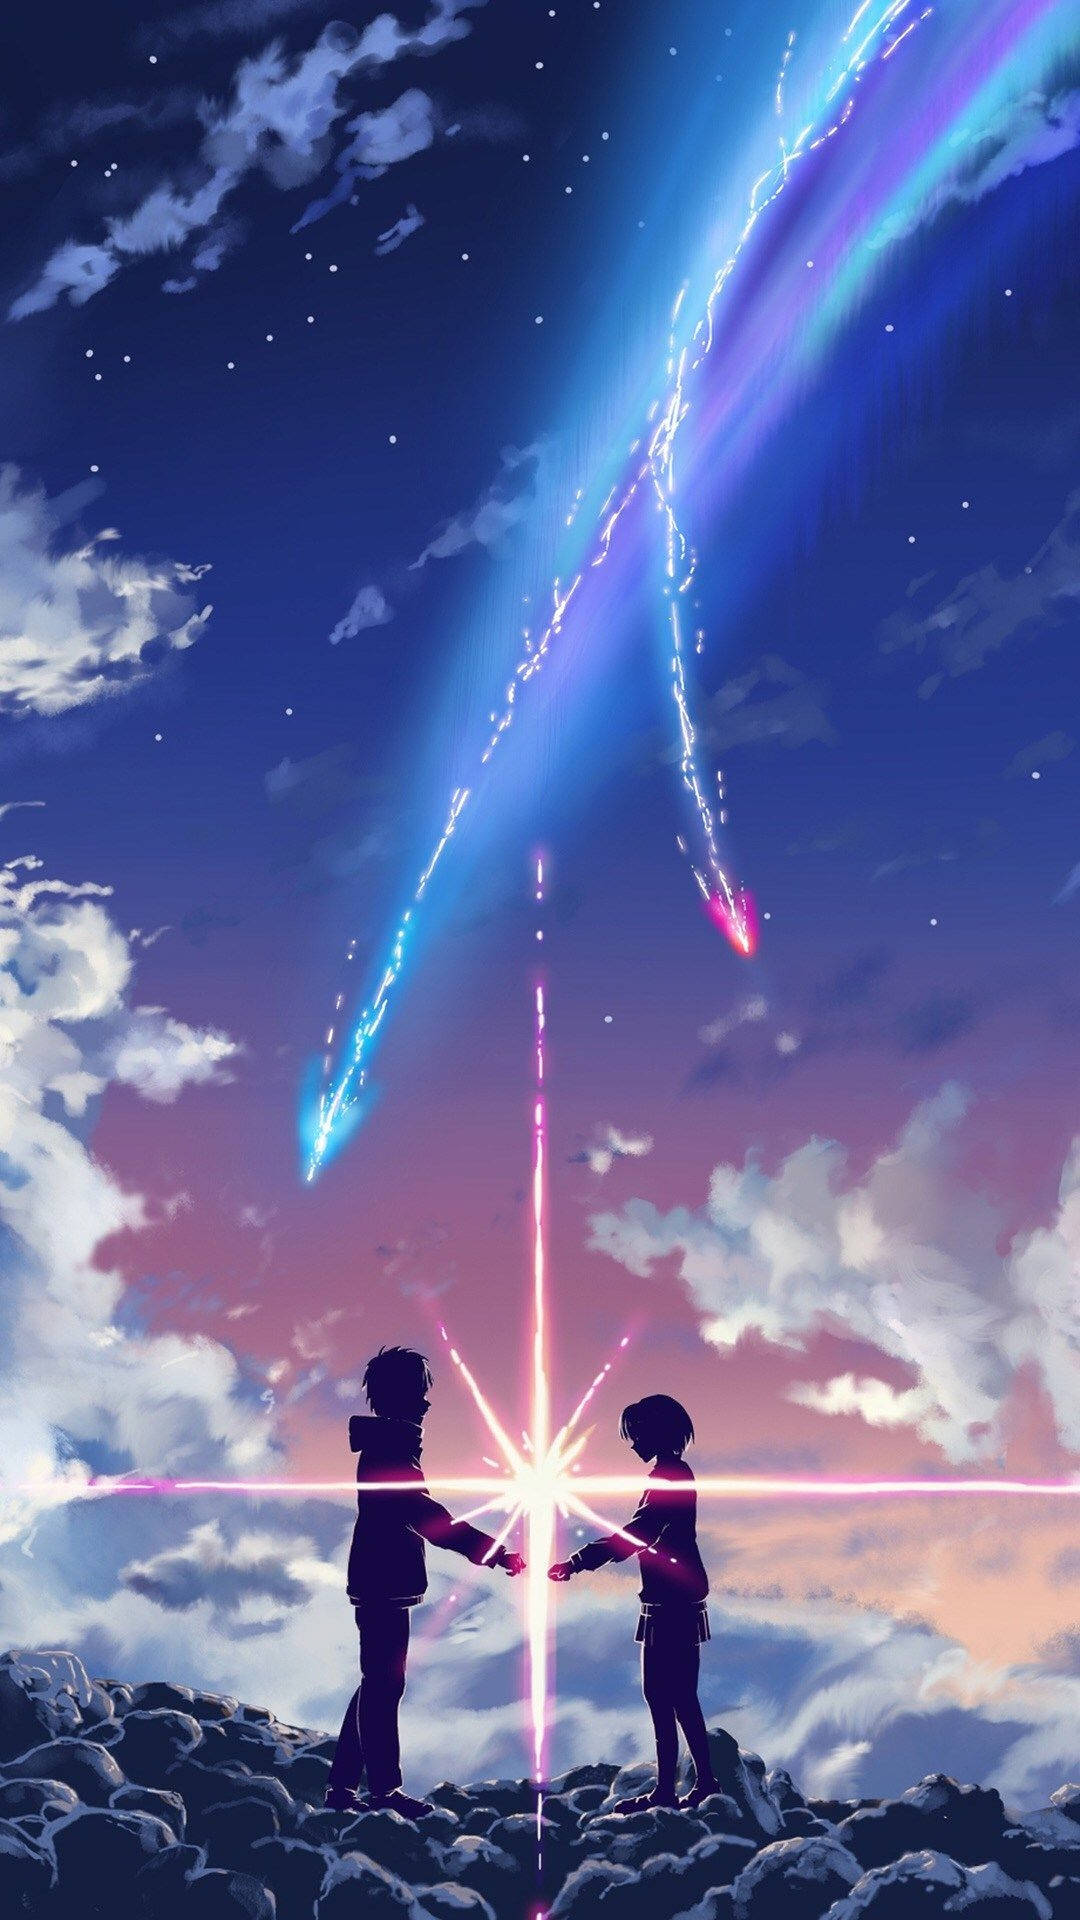 Aggregate 79+ hd anime wallpapers iphone best